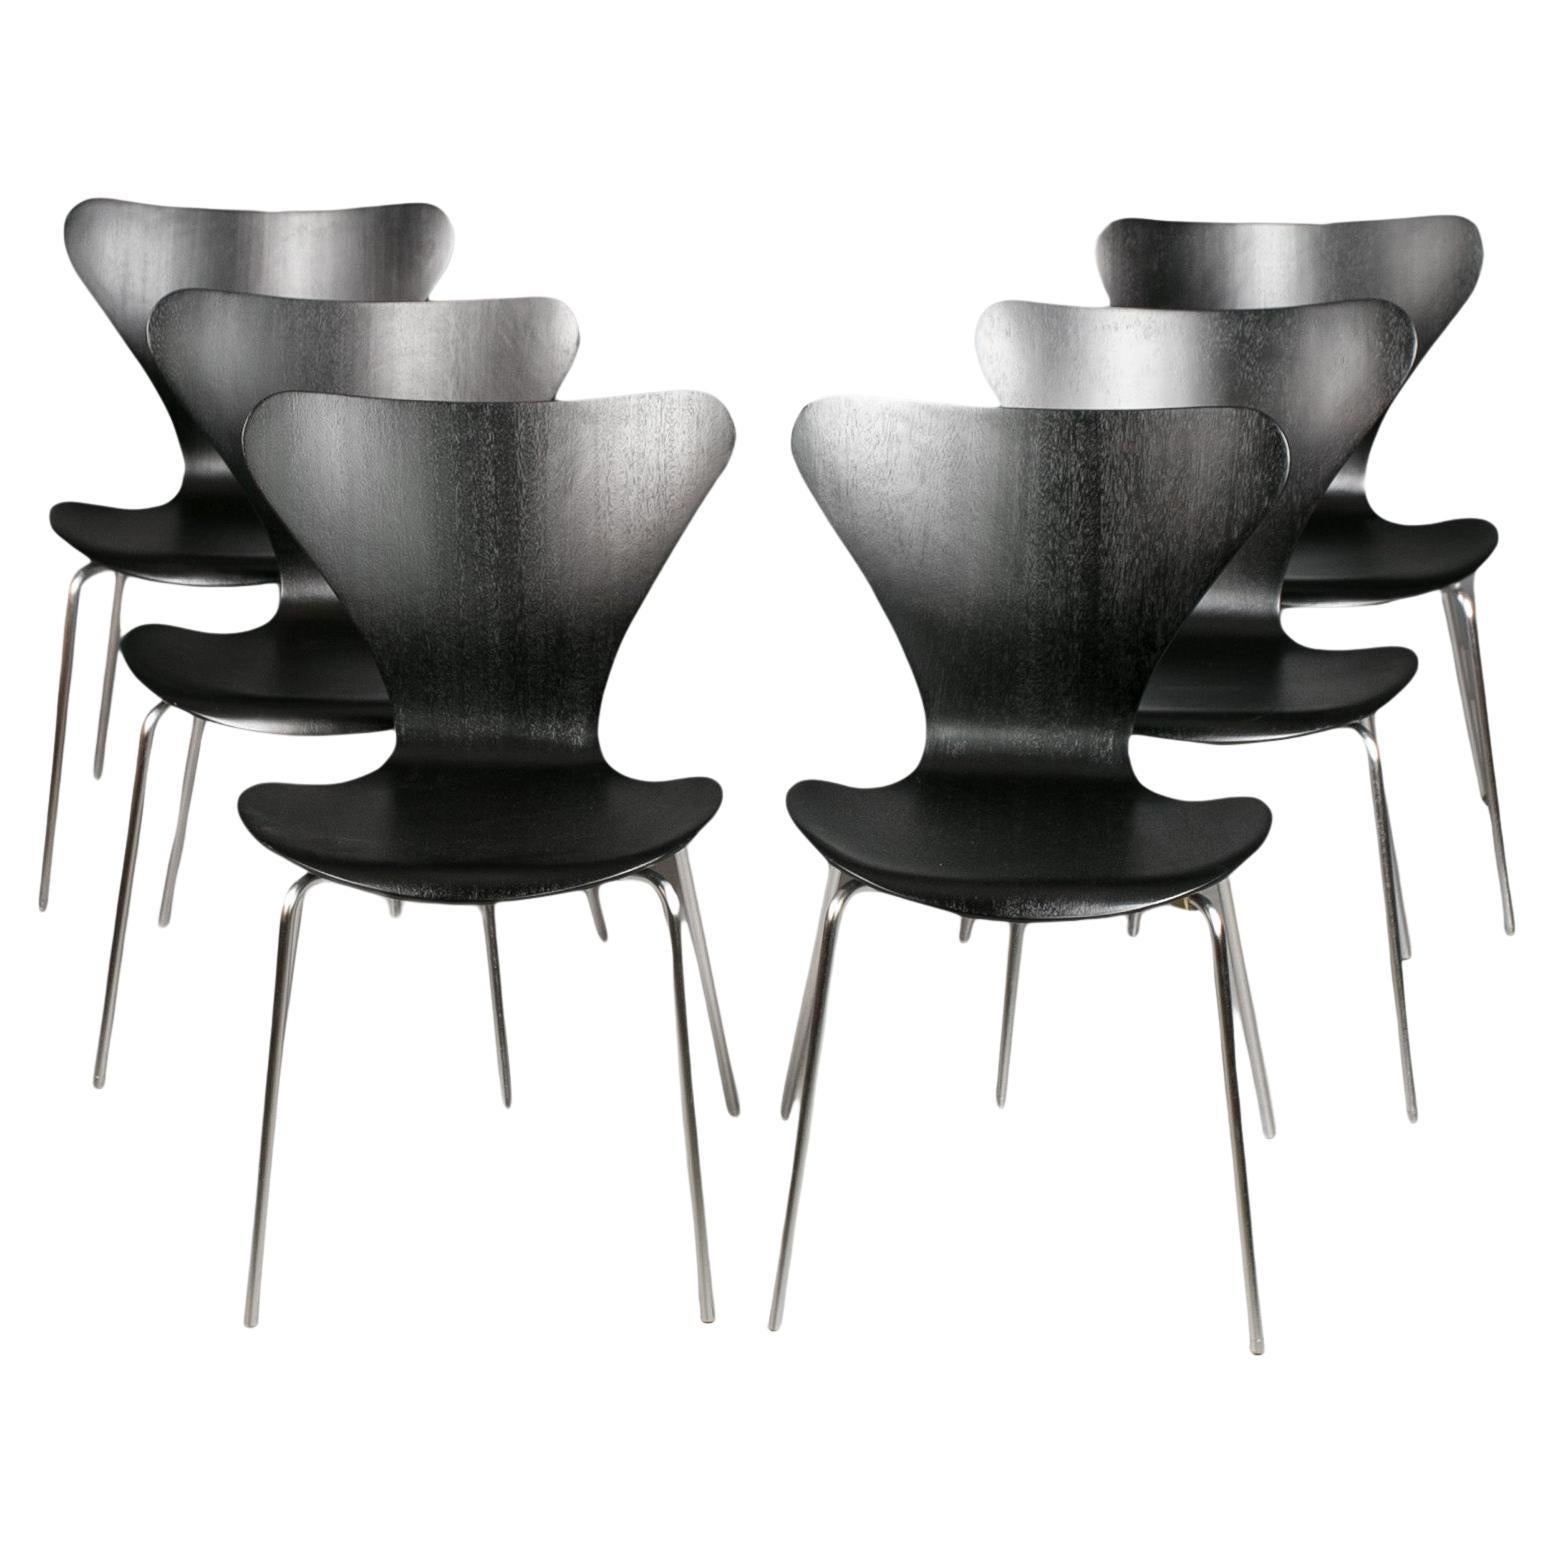 Set of 6 Dining Chairs in Black, Series7 by Arne Jacobsen, Fritz Hansen, 1950s For Sale